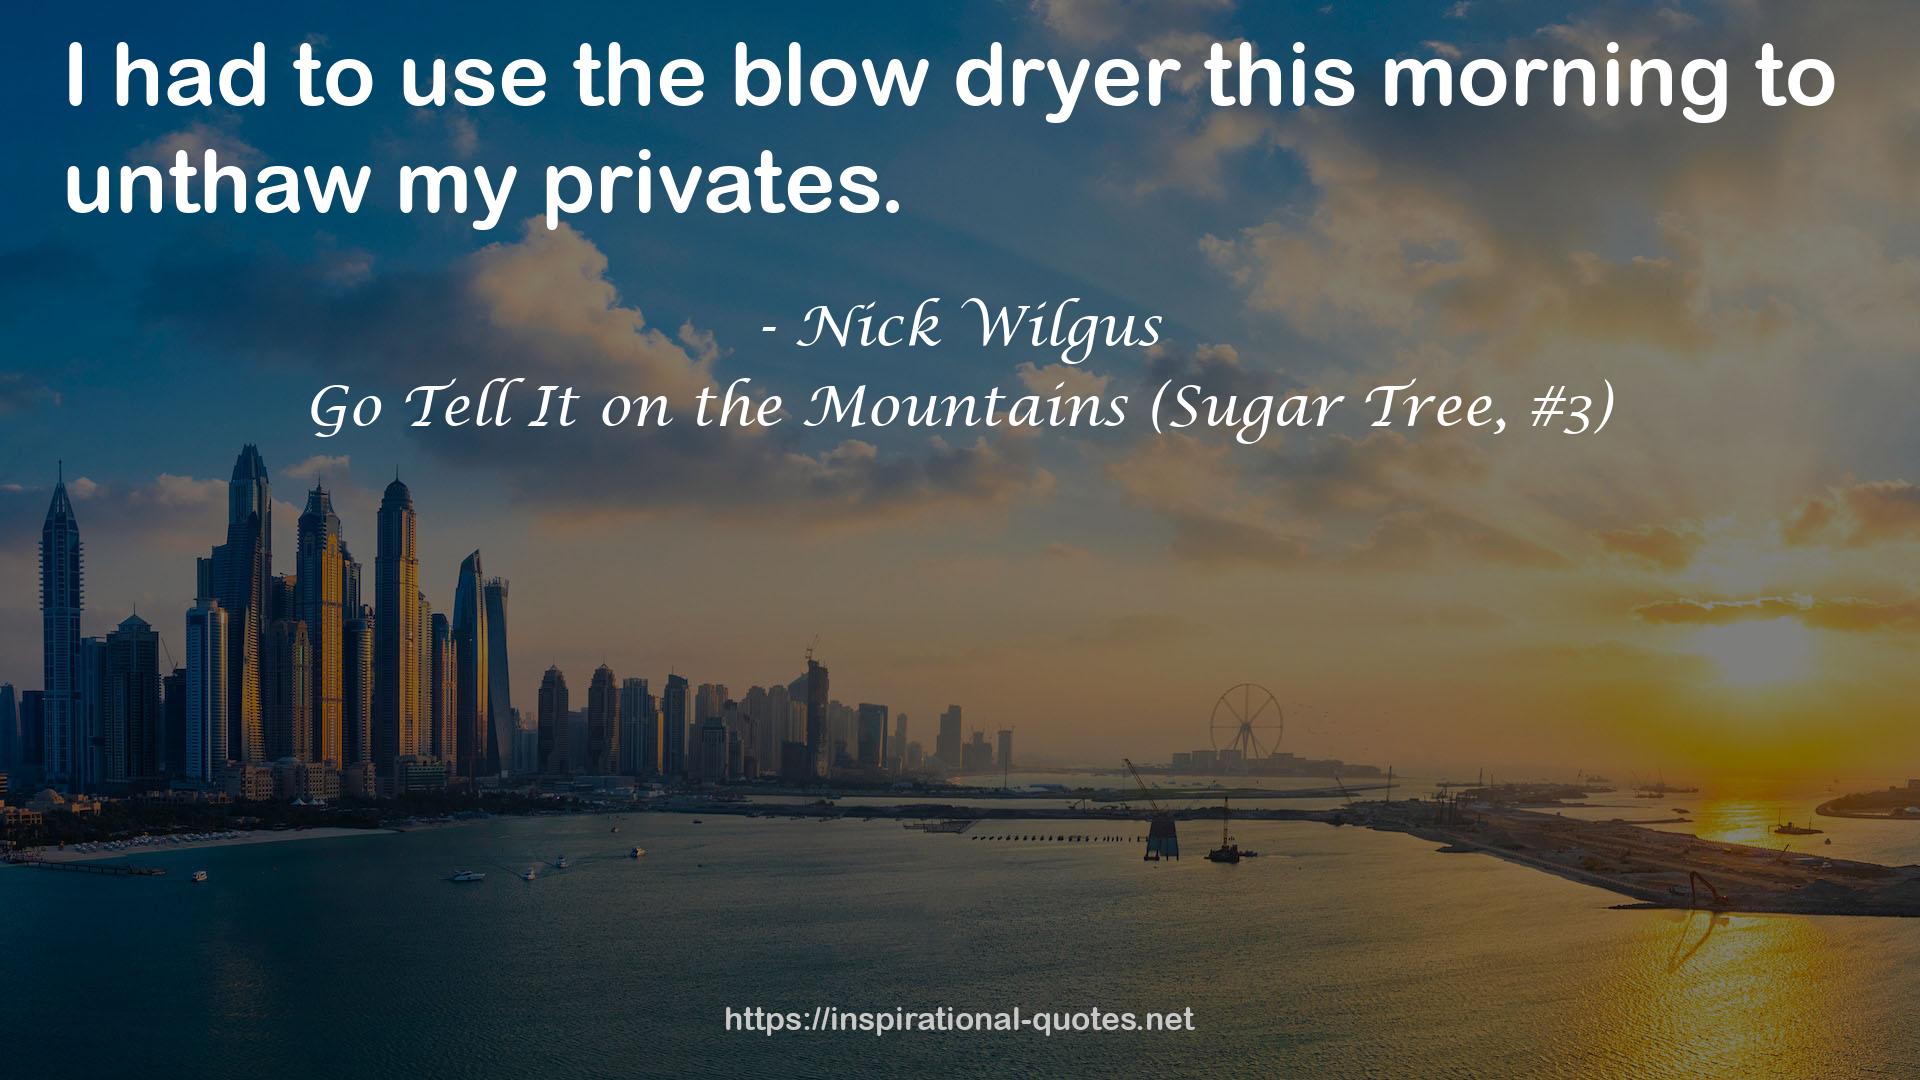 Go Tell It on the Mountains (Sugar Tree, #3) QUOTES